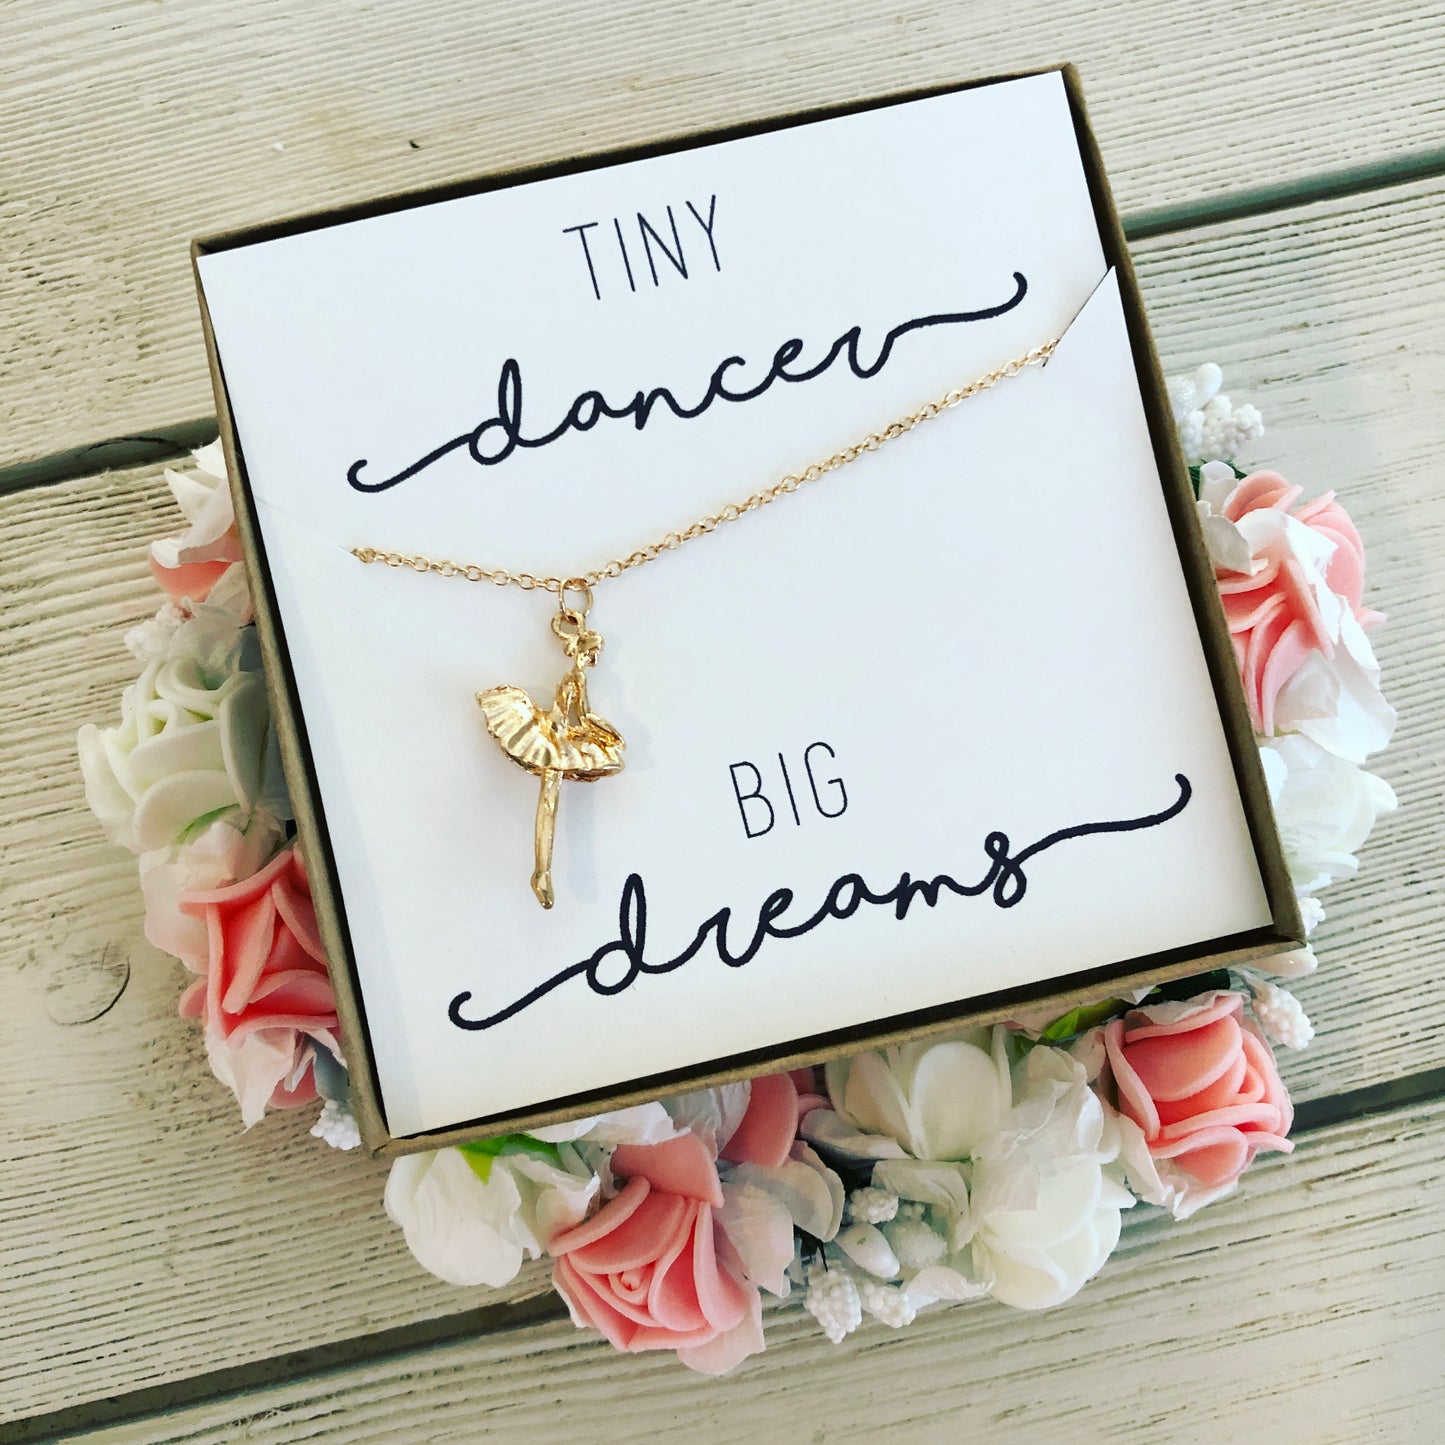 Tiny Dancer Necklace with Personalized Card